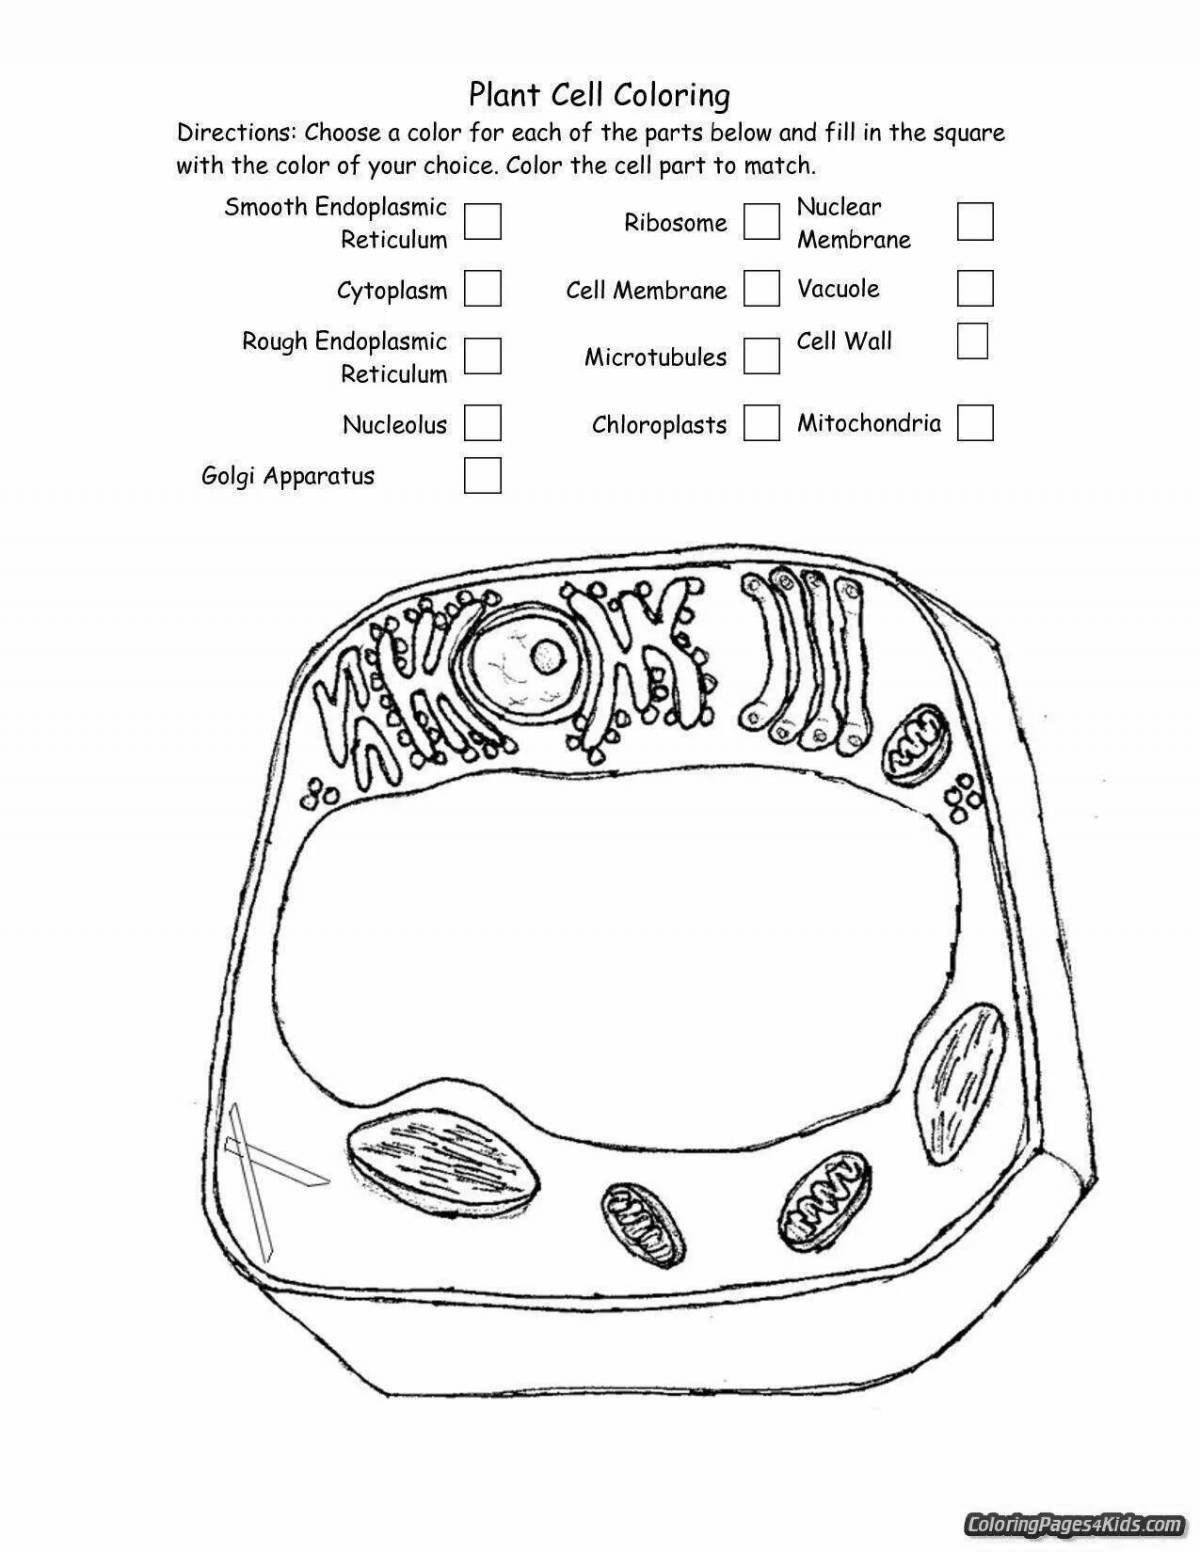 Coloring page cheerful plant cell